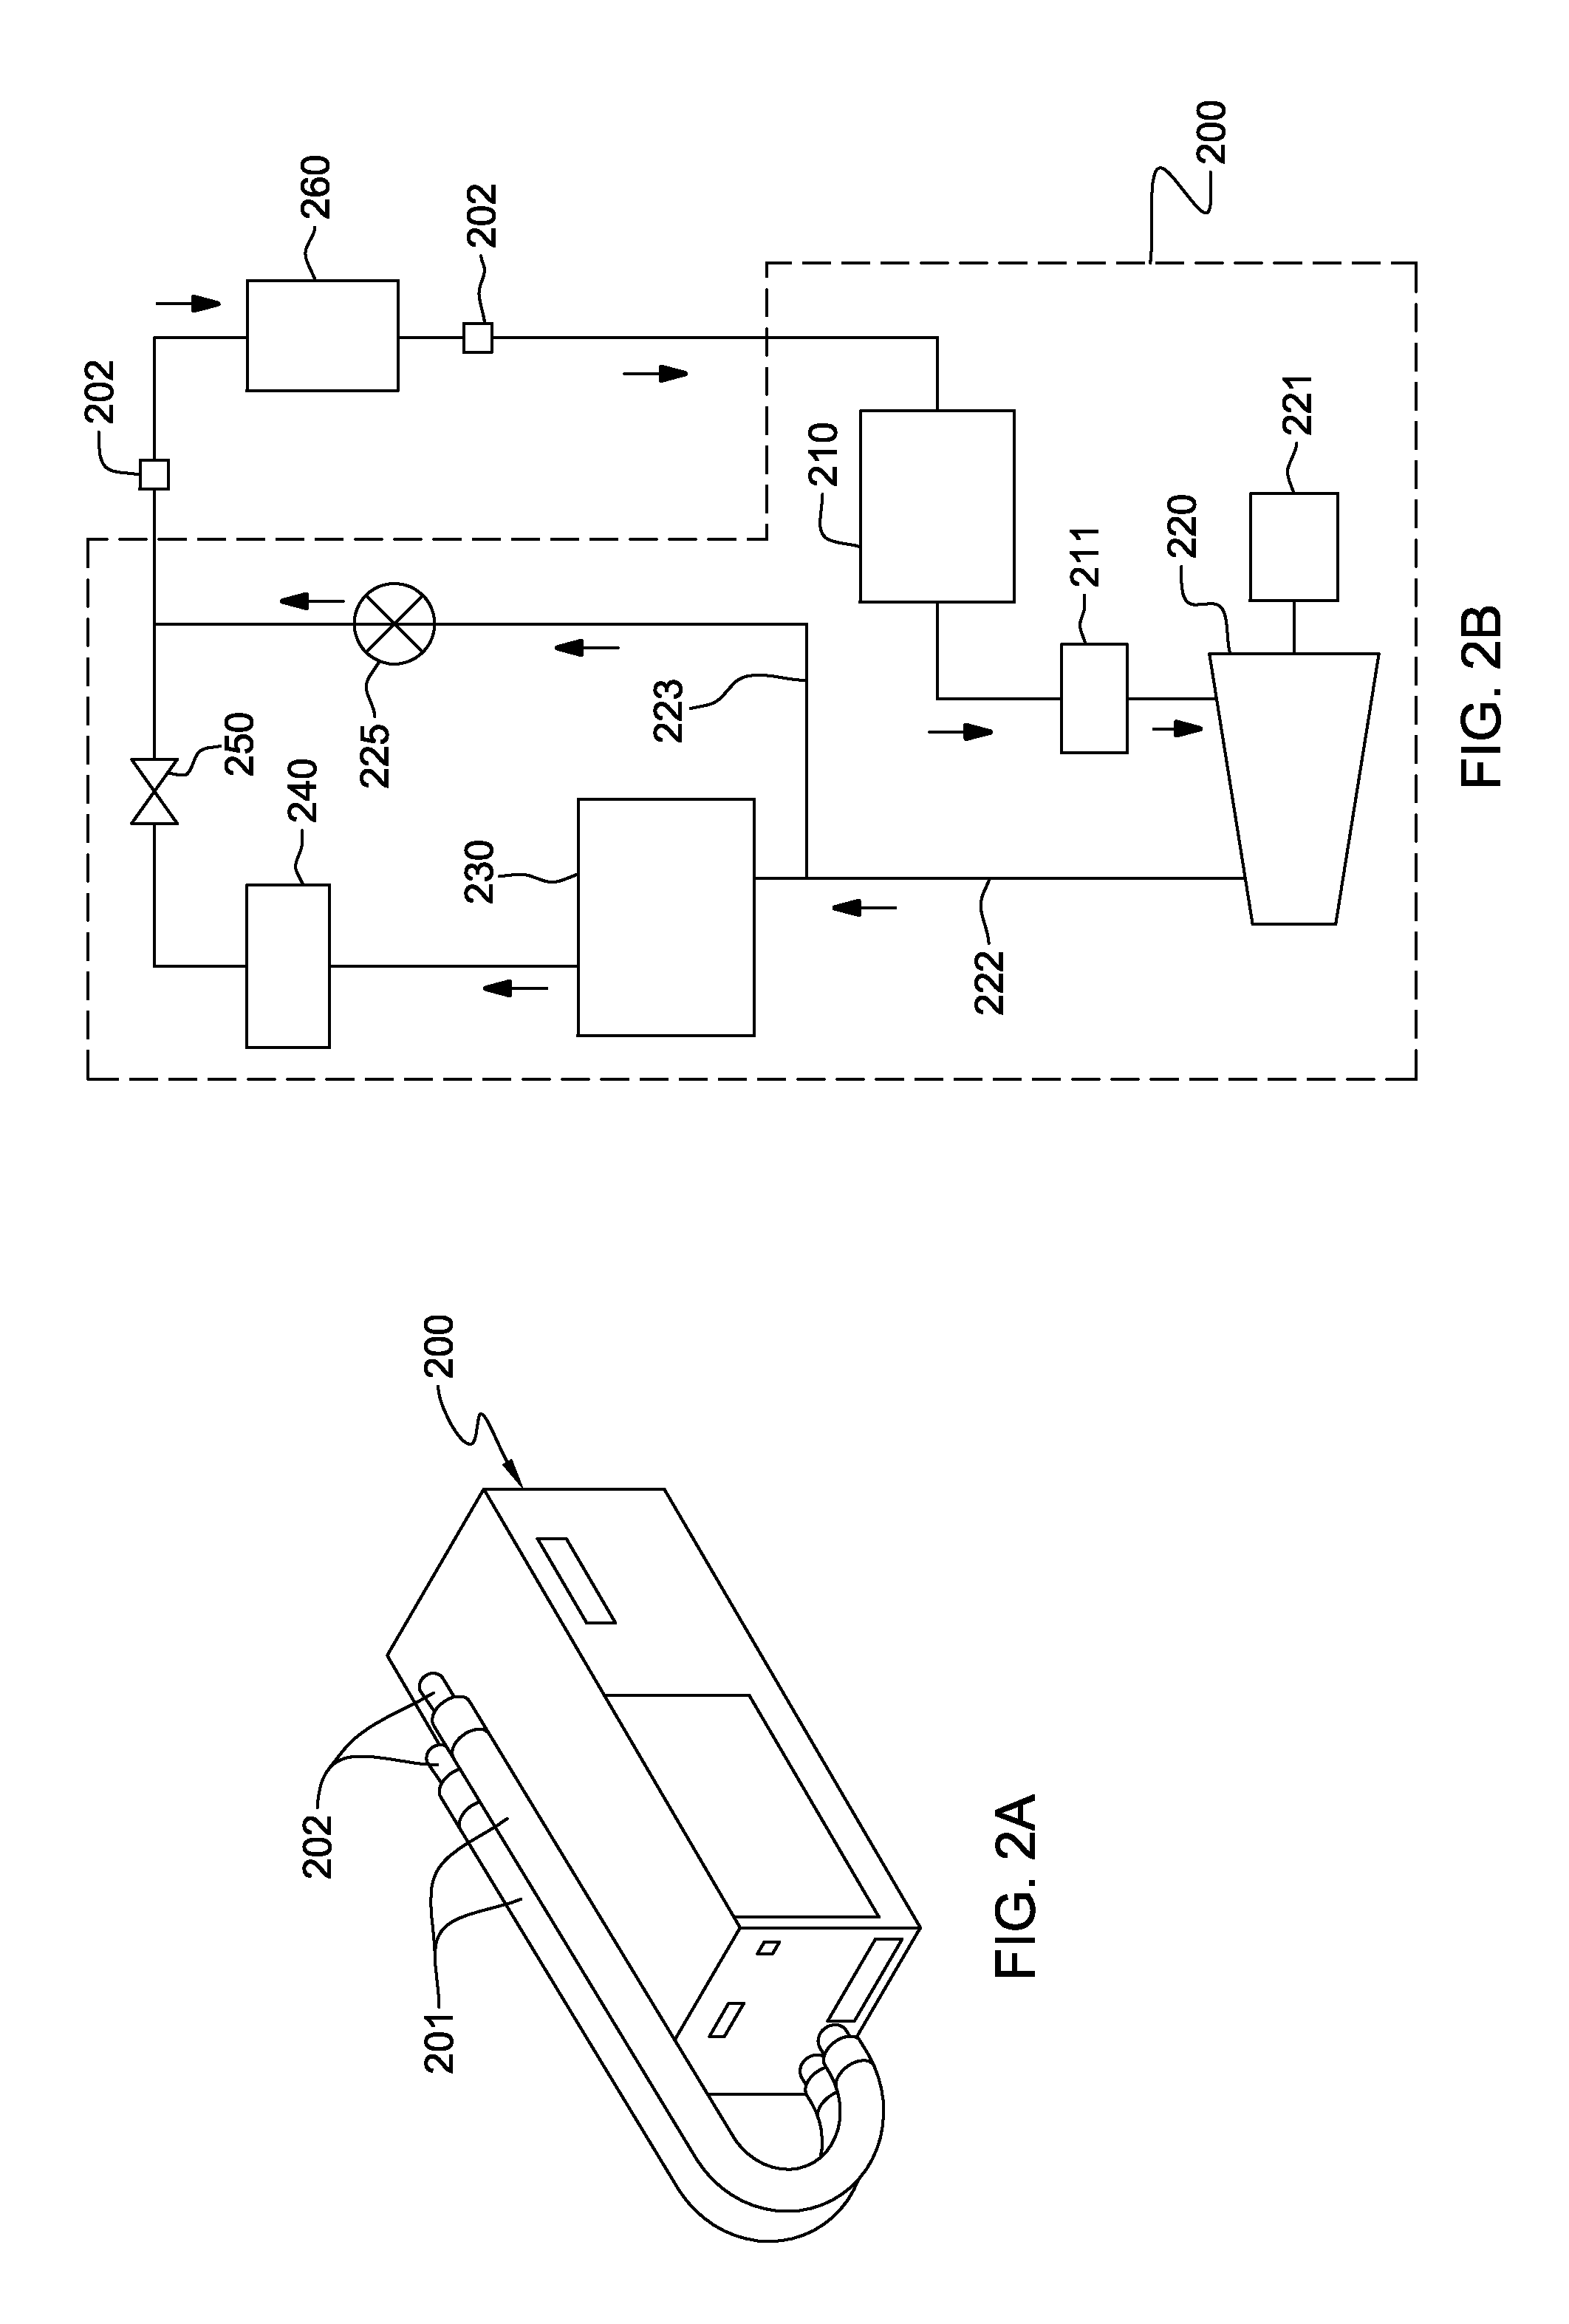 Vapor-compression refrigeration apparatus with backup air-cooled heat sink and auxiliary refrigerant heater